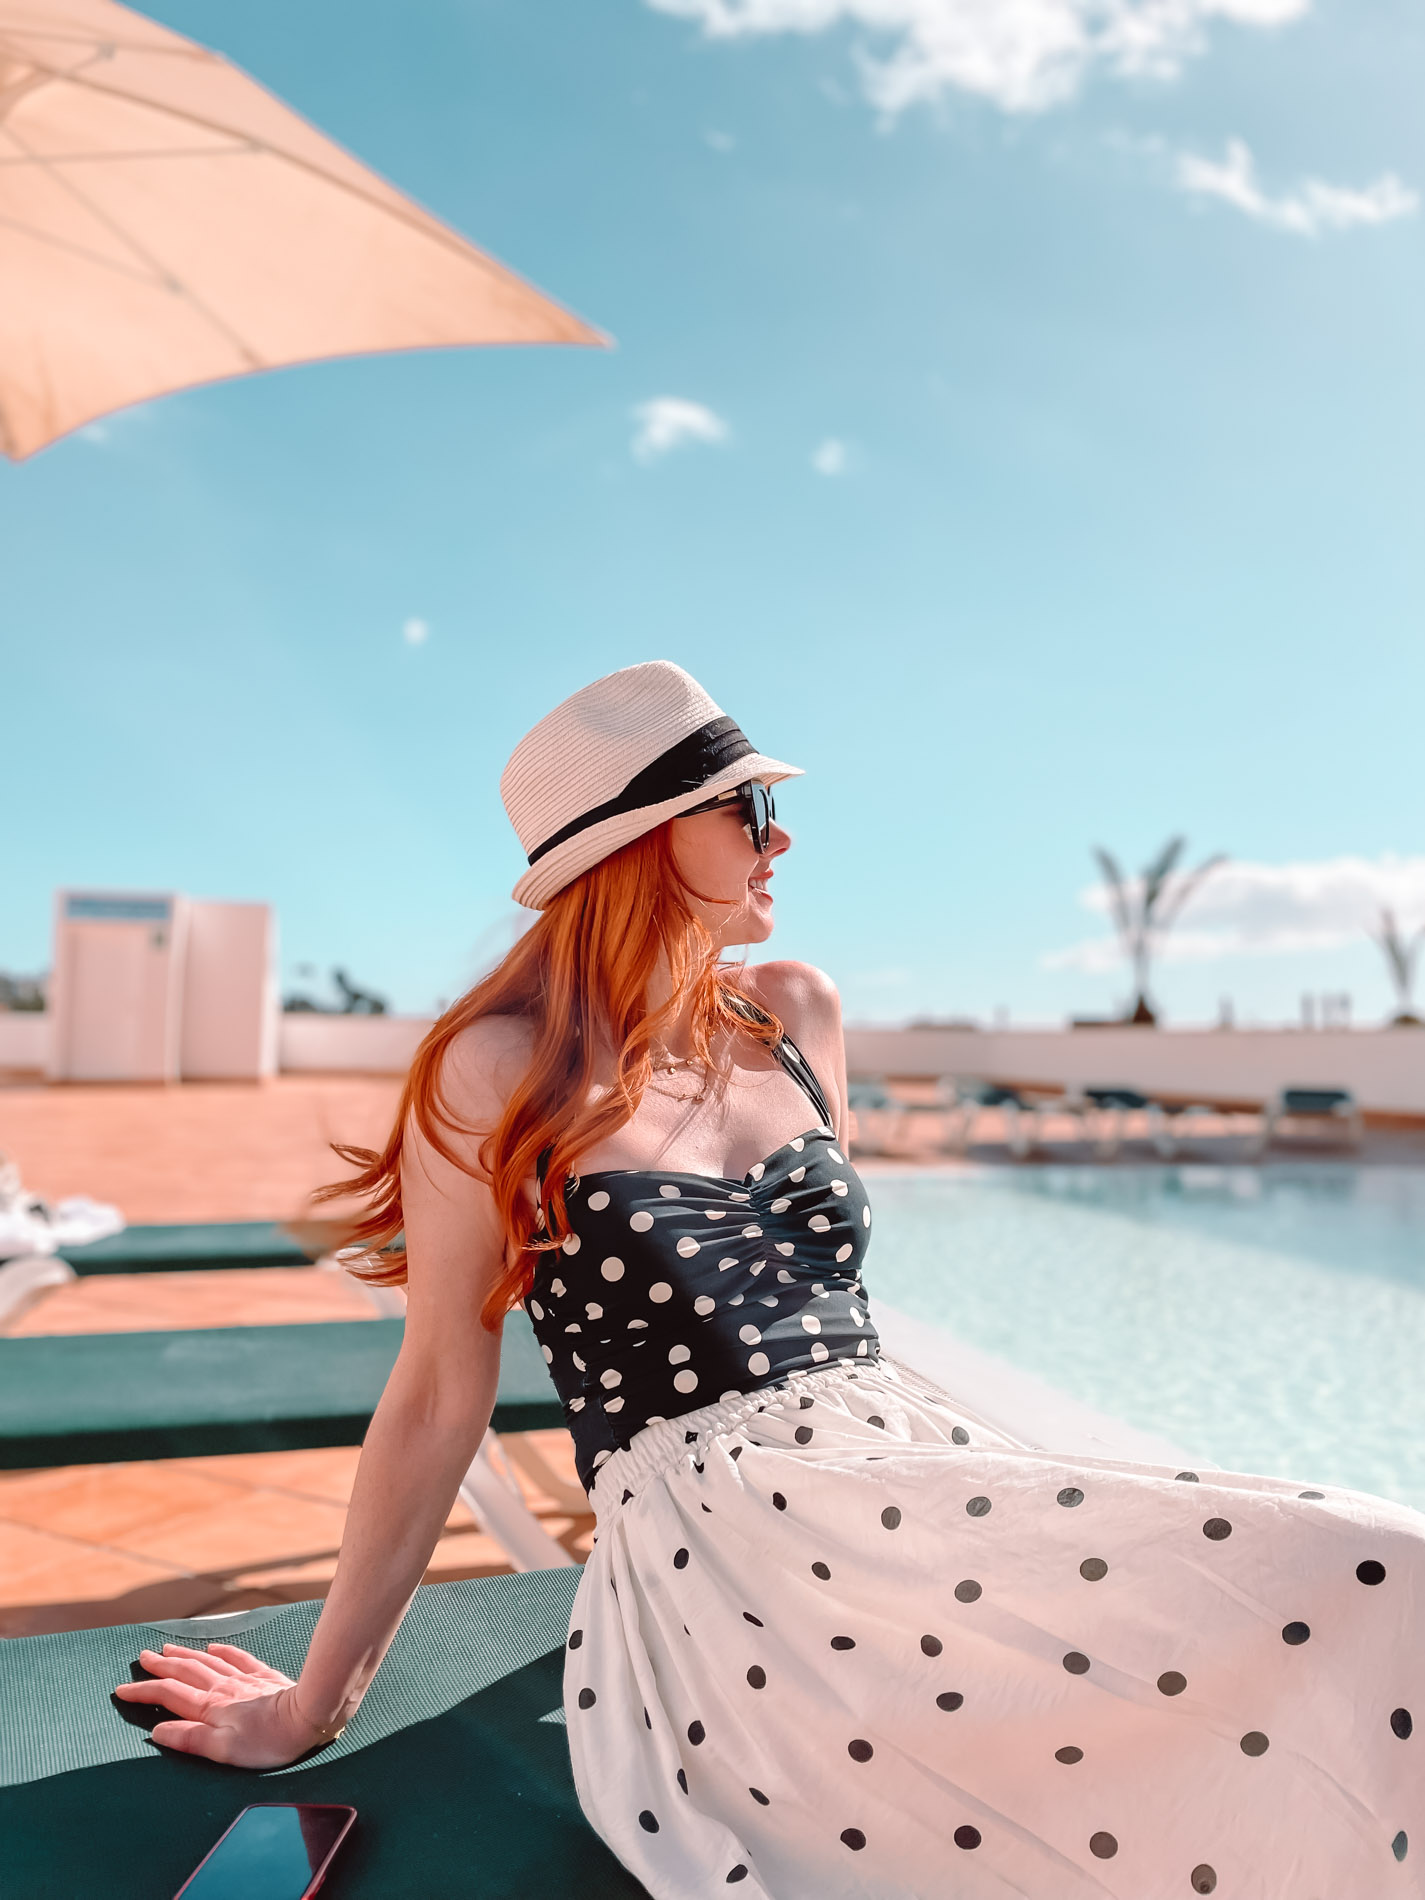 polka dot outfit by the pool in Tenerife